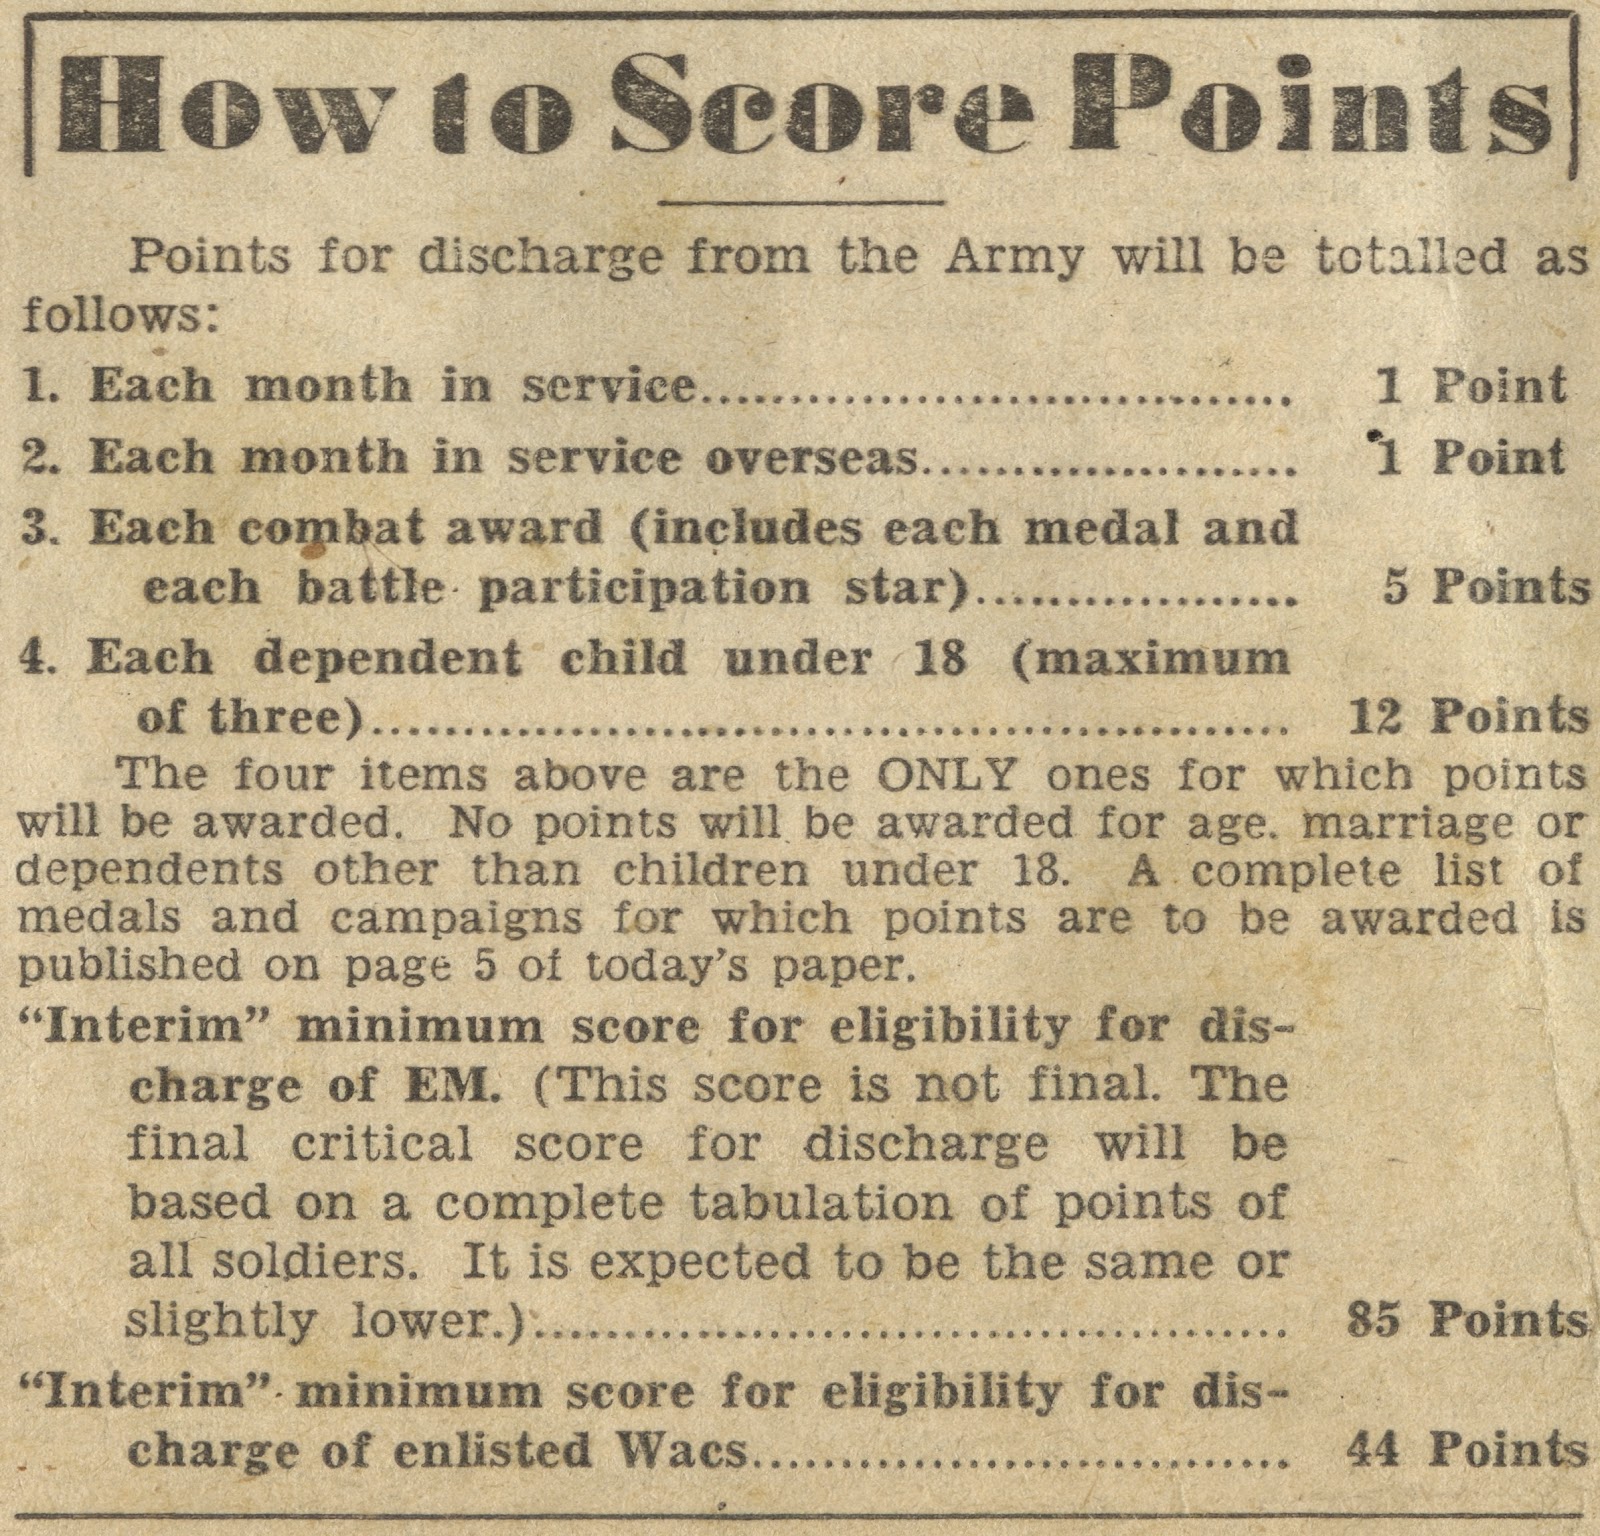 [How_to_Score_Points_May_11_19453.jpg]